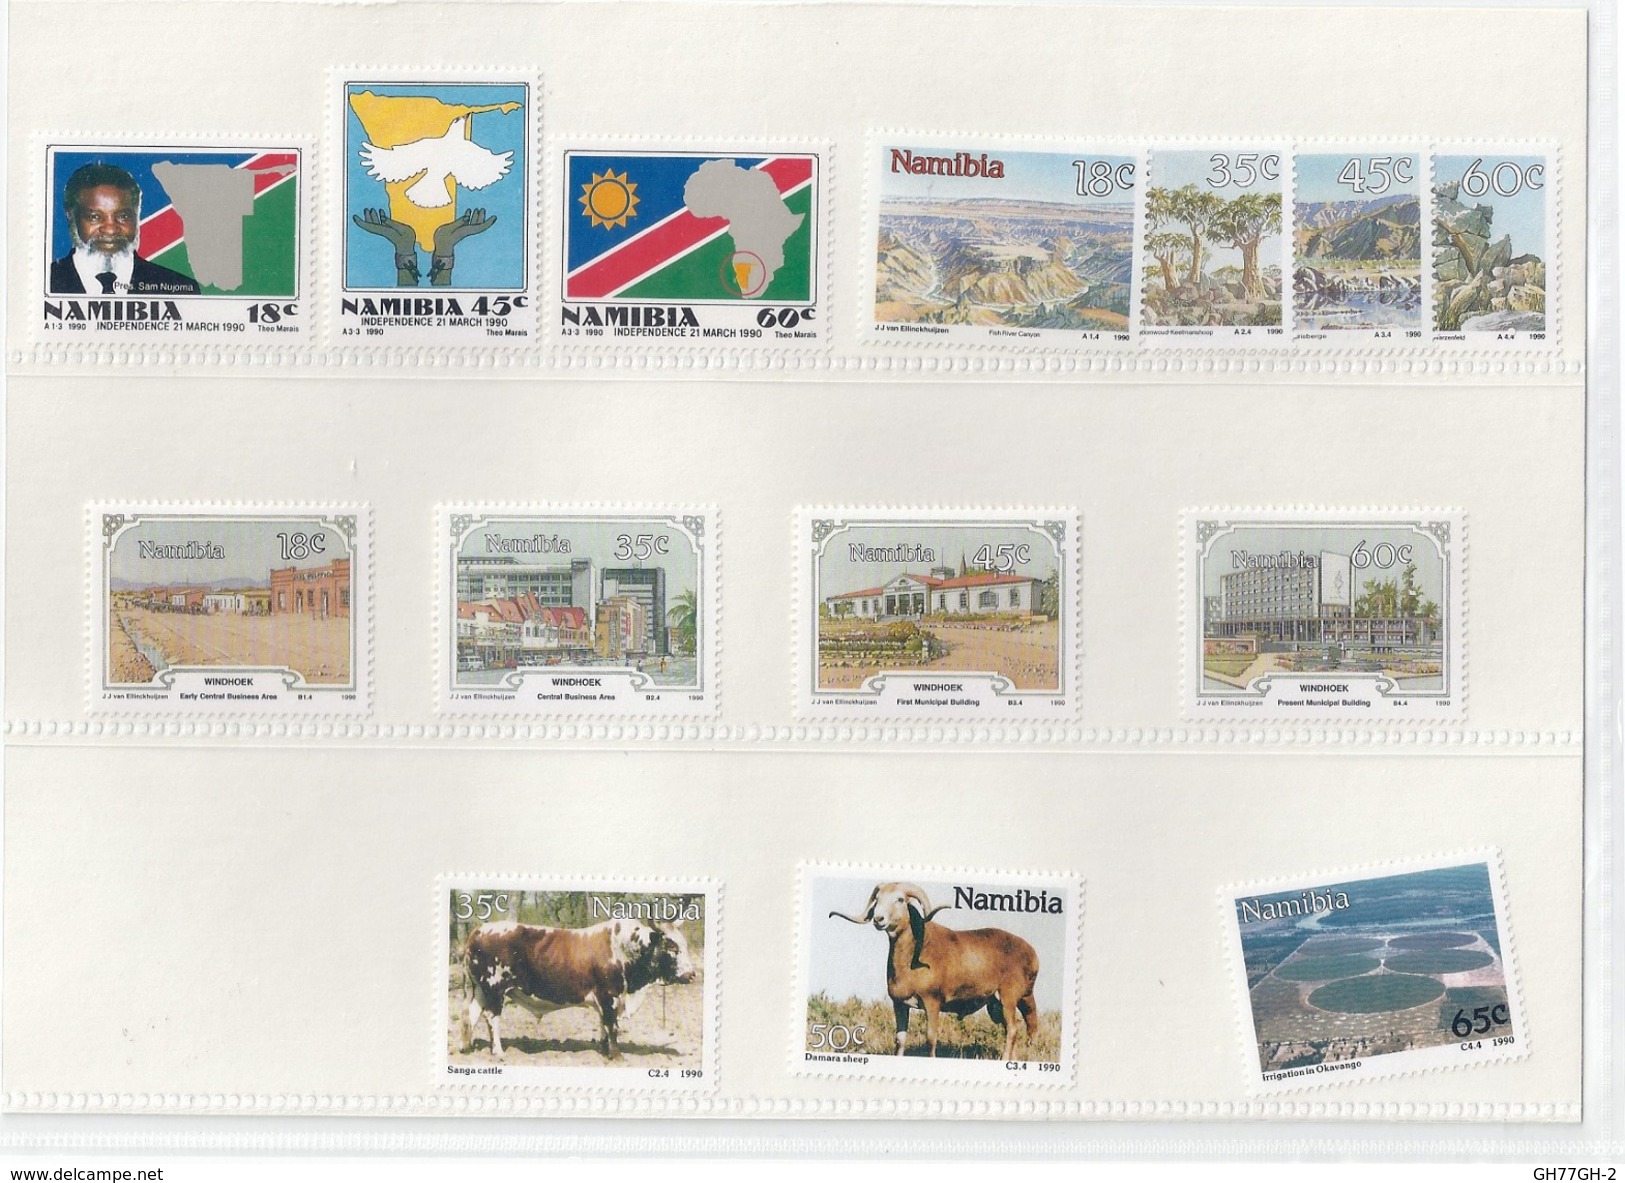 Namibia Mounted Set 14 Stamps Independence 21 MARCH 1990 NAMIBIE INDEPENDANCE 1990 - Namibia (1990- ...)